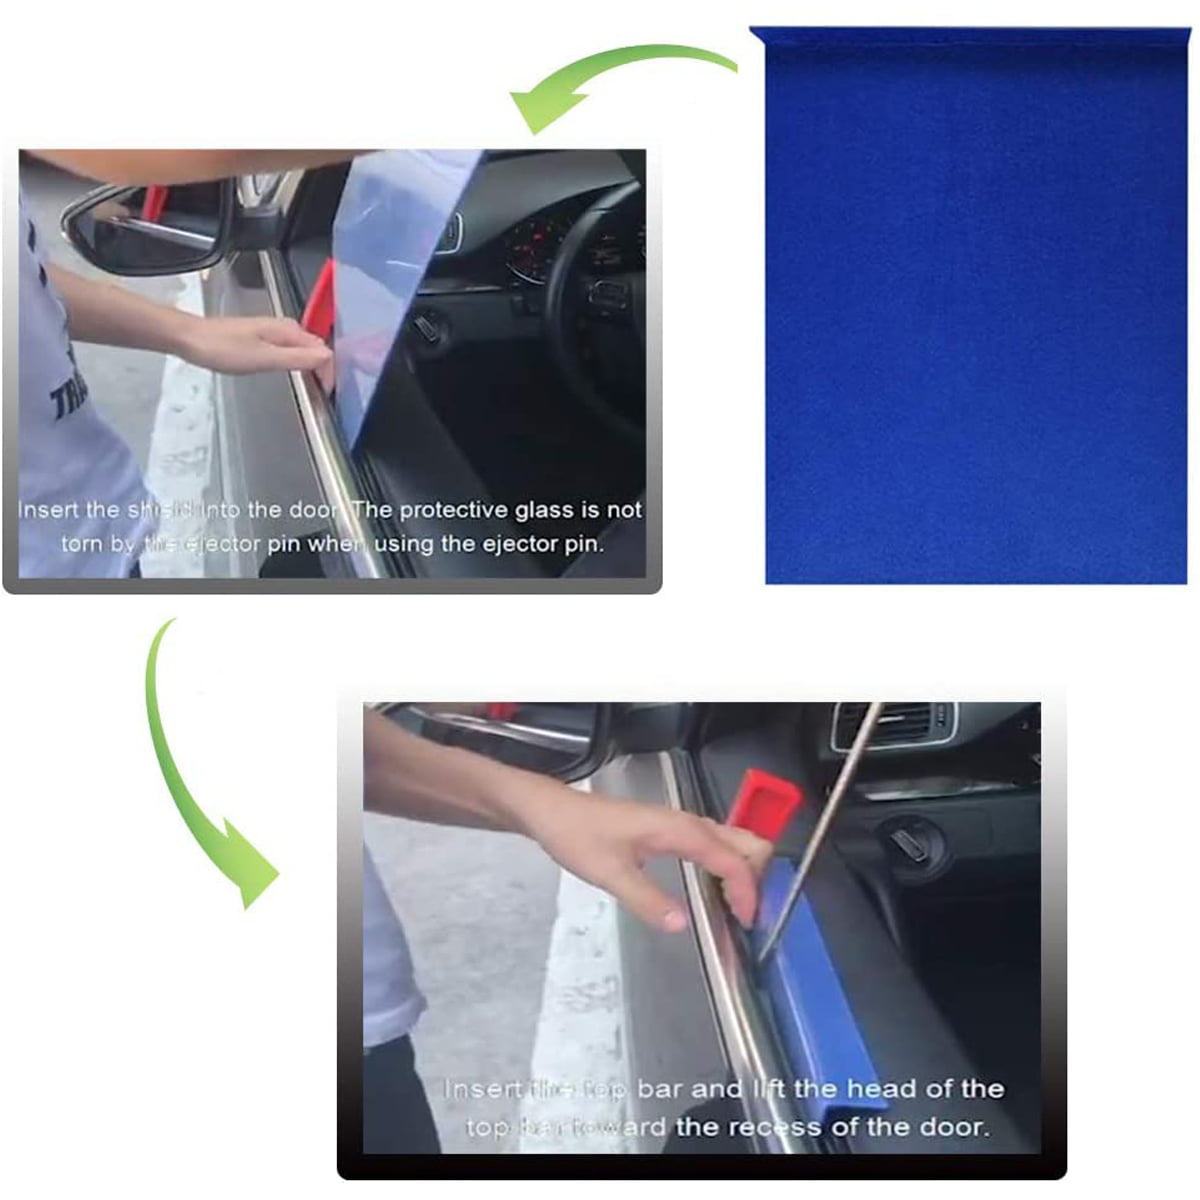 RETYLY Paintless Dent Repair Tools Black Window Guard Protect with Felt Paintless Dent Removal Window Curve Wedge for Car Repair